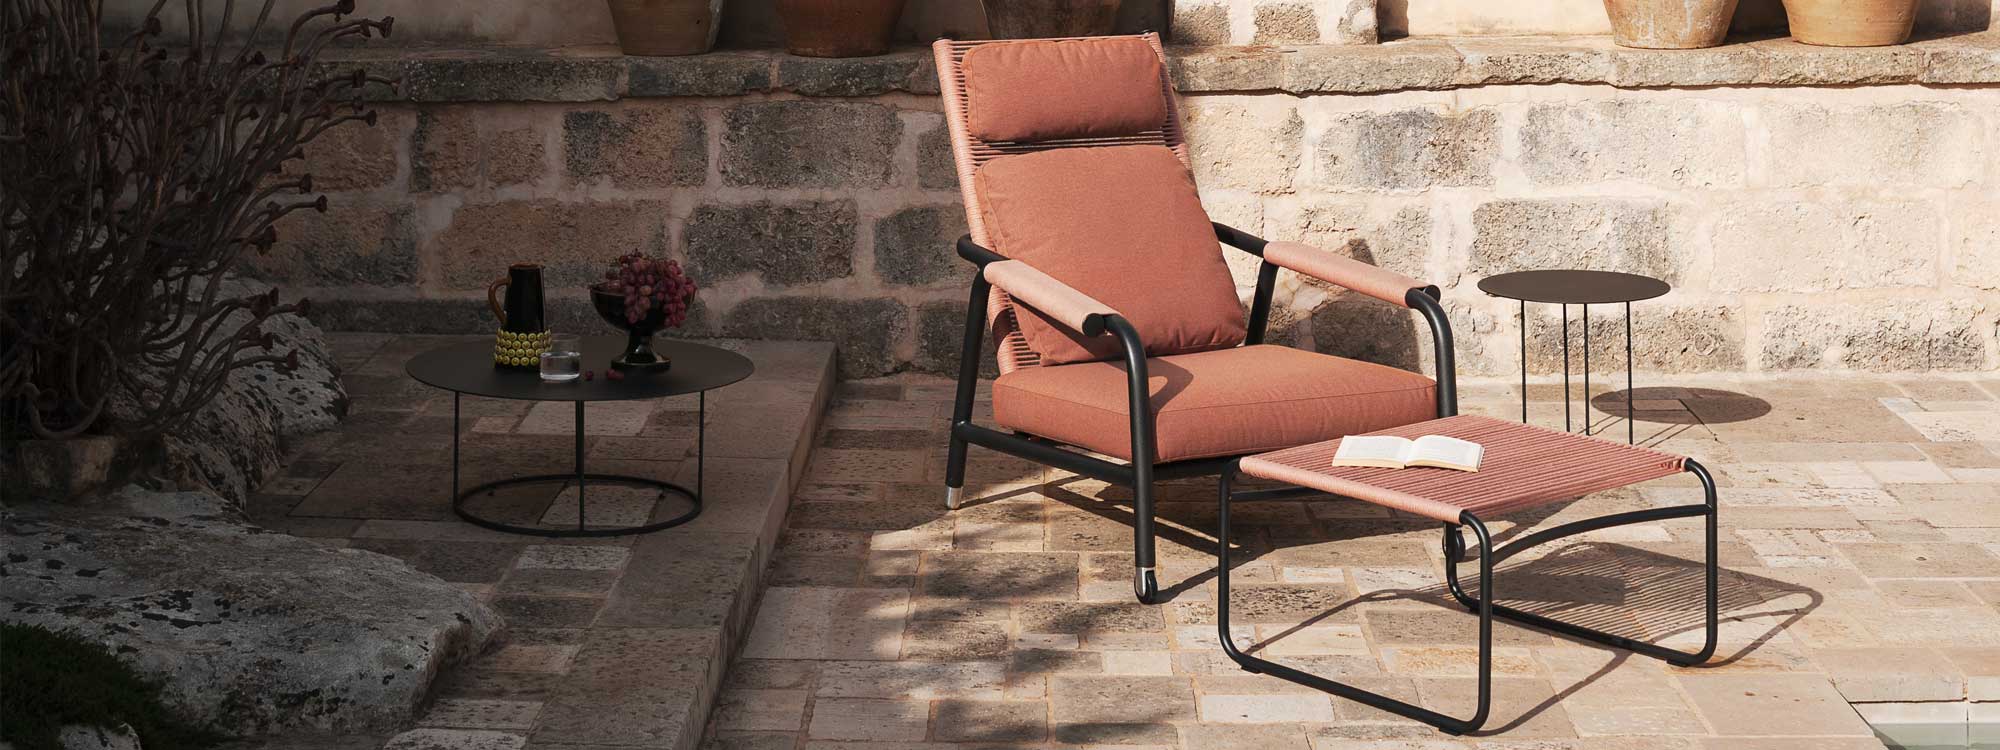 Image of Astra high-backed garden recliner and Harp foot stool in dappled sunlight on terrace